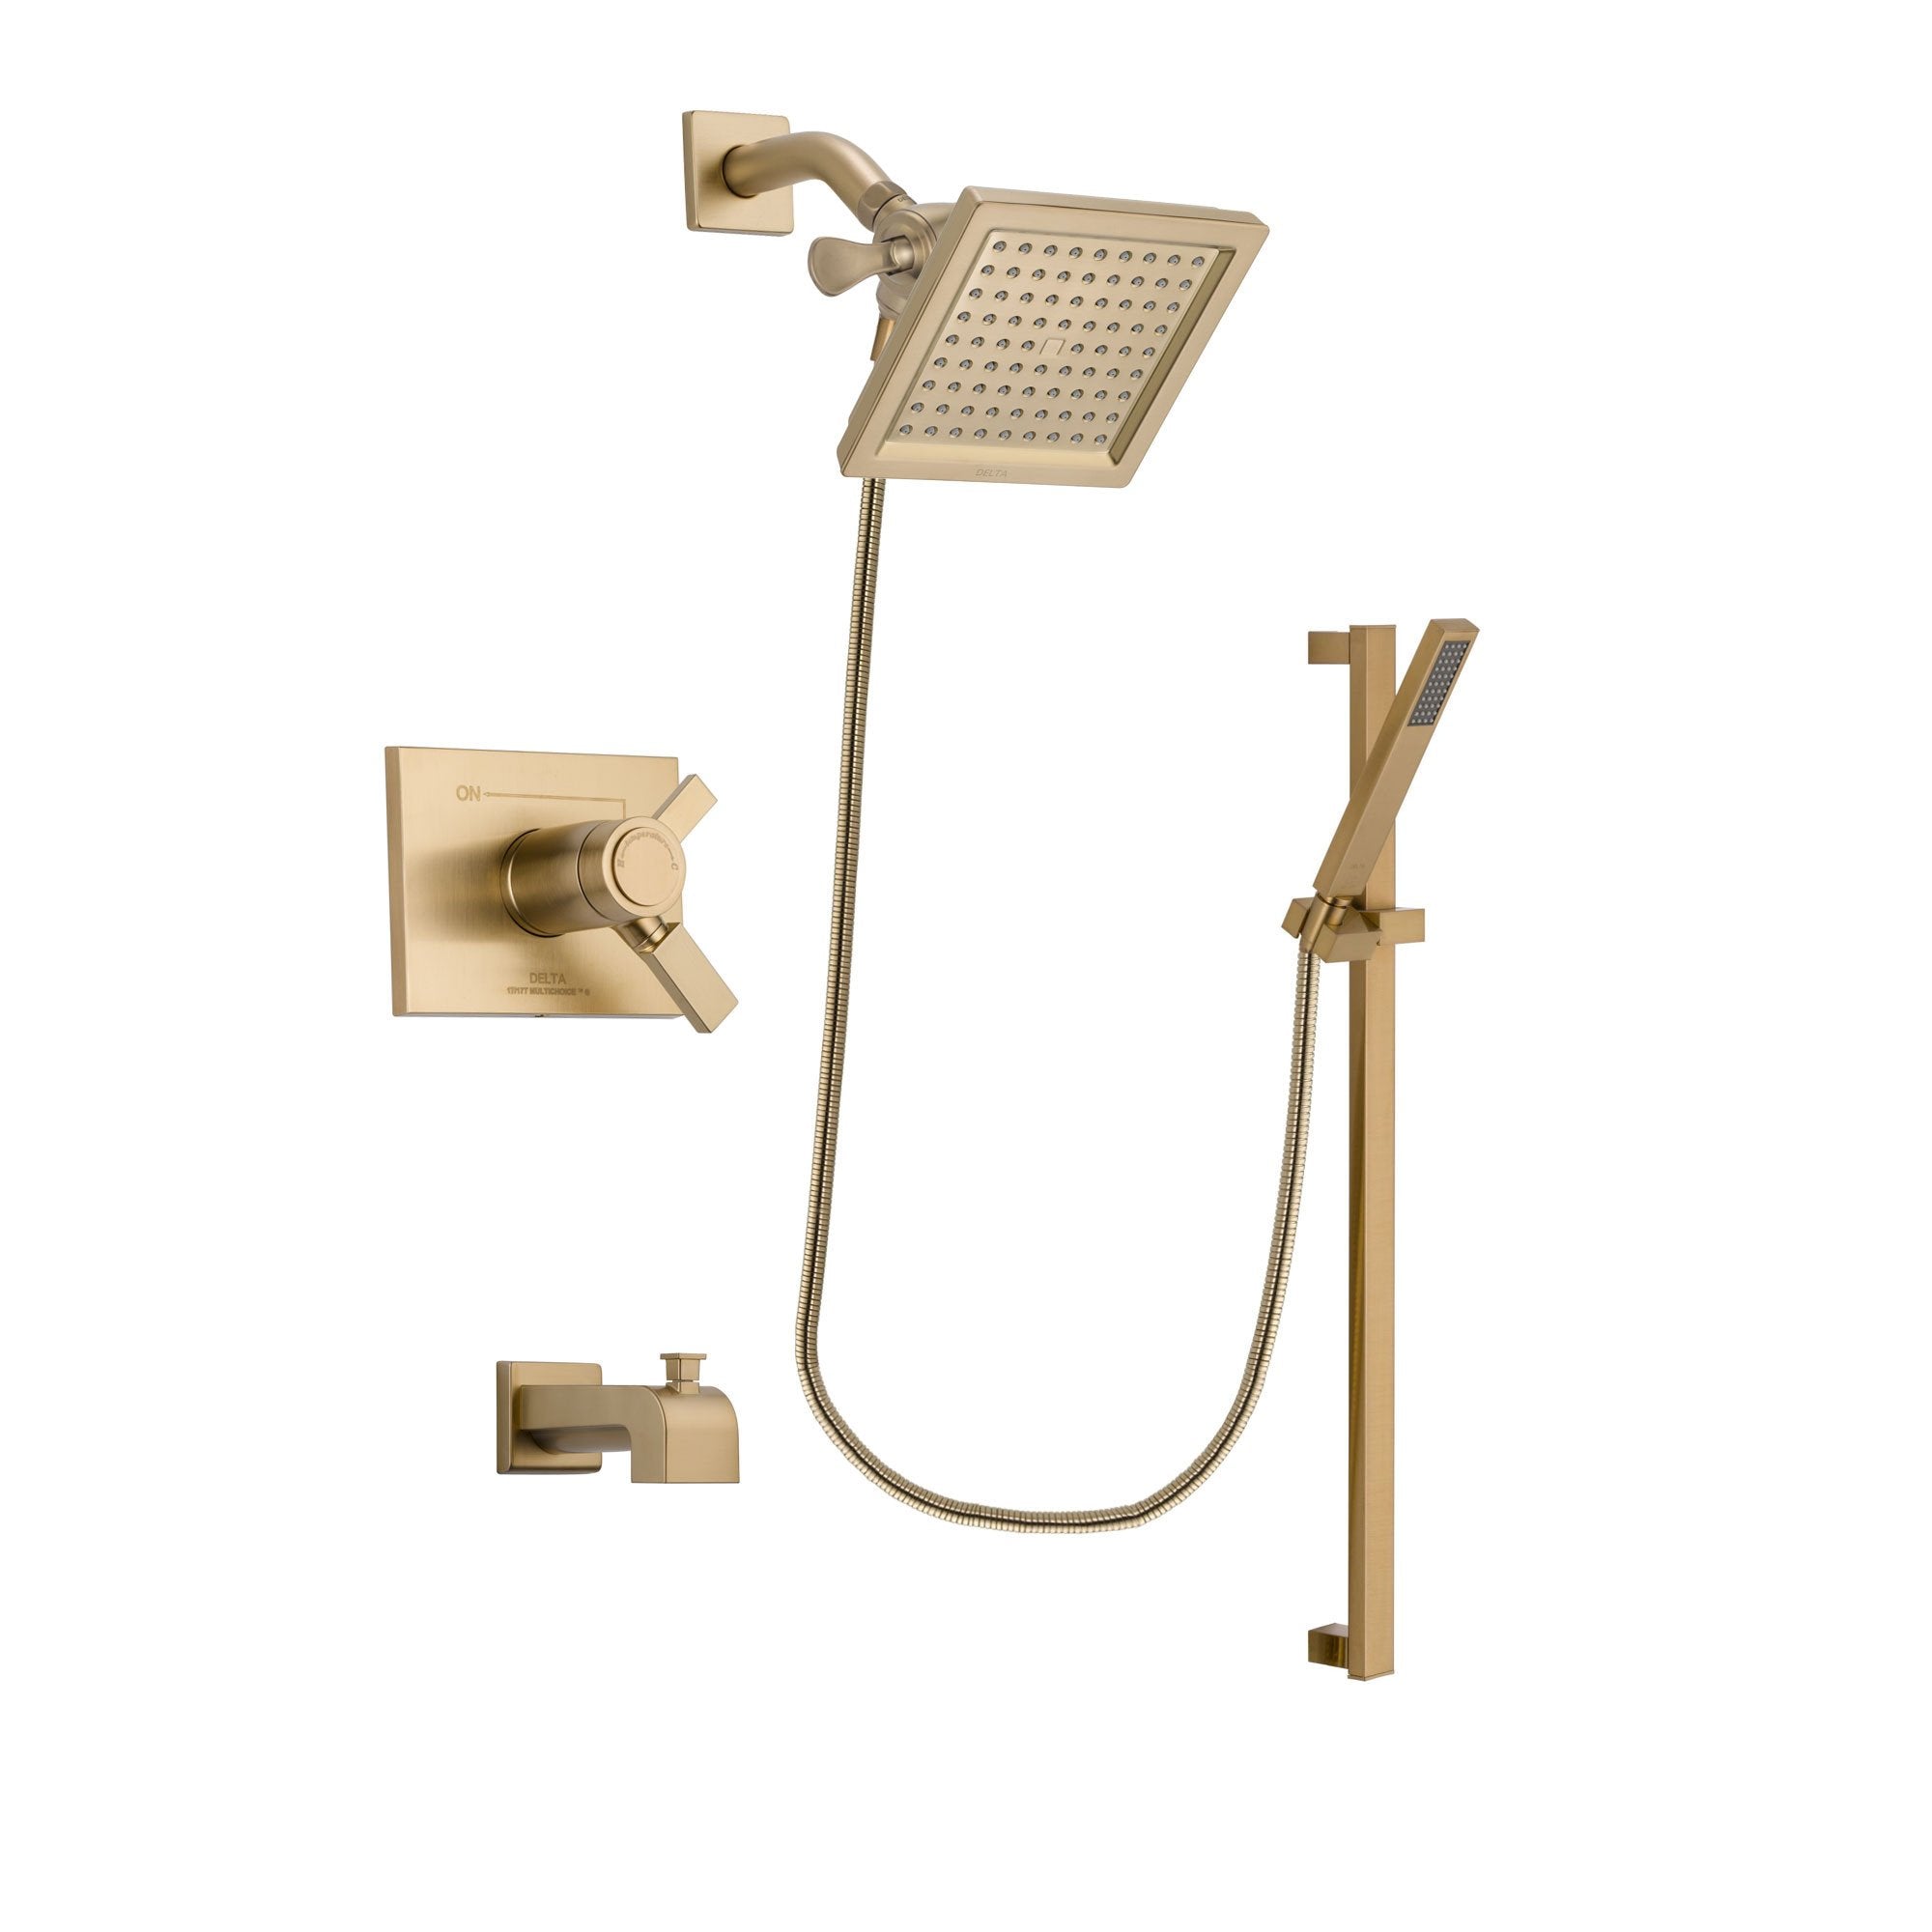 Delta Vero Champagne Bronze Finish Thermostatic Tub and Shower Faucet System Package with 6.5-inch Square Rain Showerhead and Modern Handheld Shower with Square Slide Bar Includes Rough-in Valve and Tub Spout DSP3995V